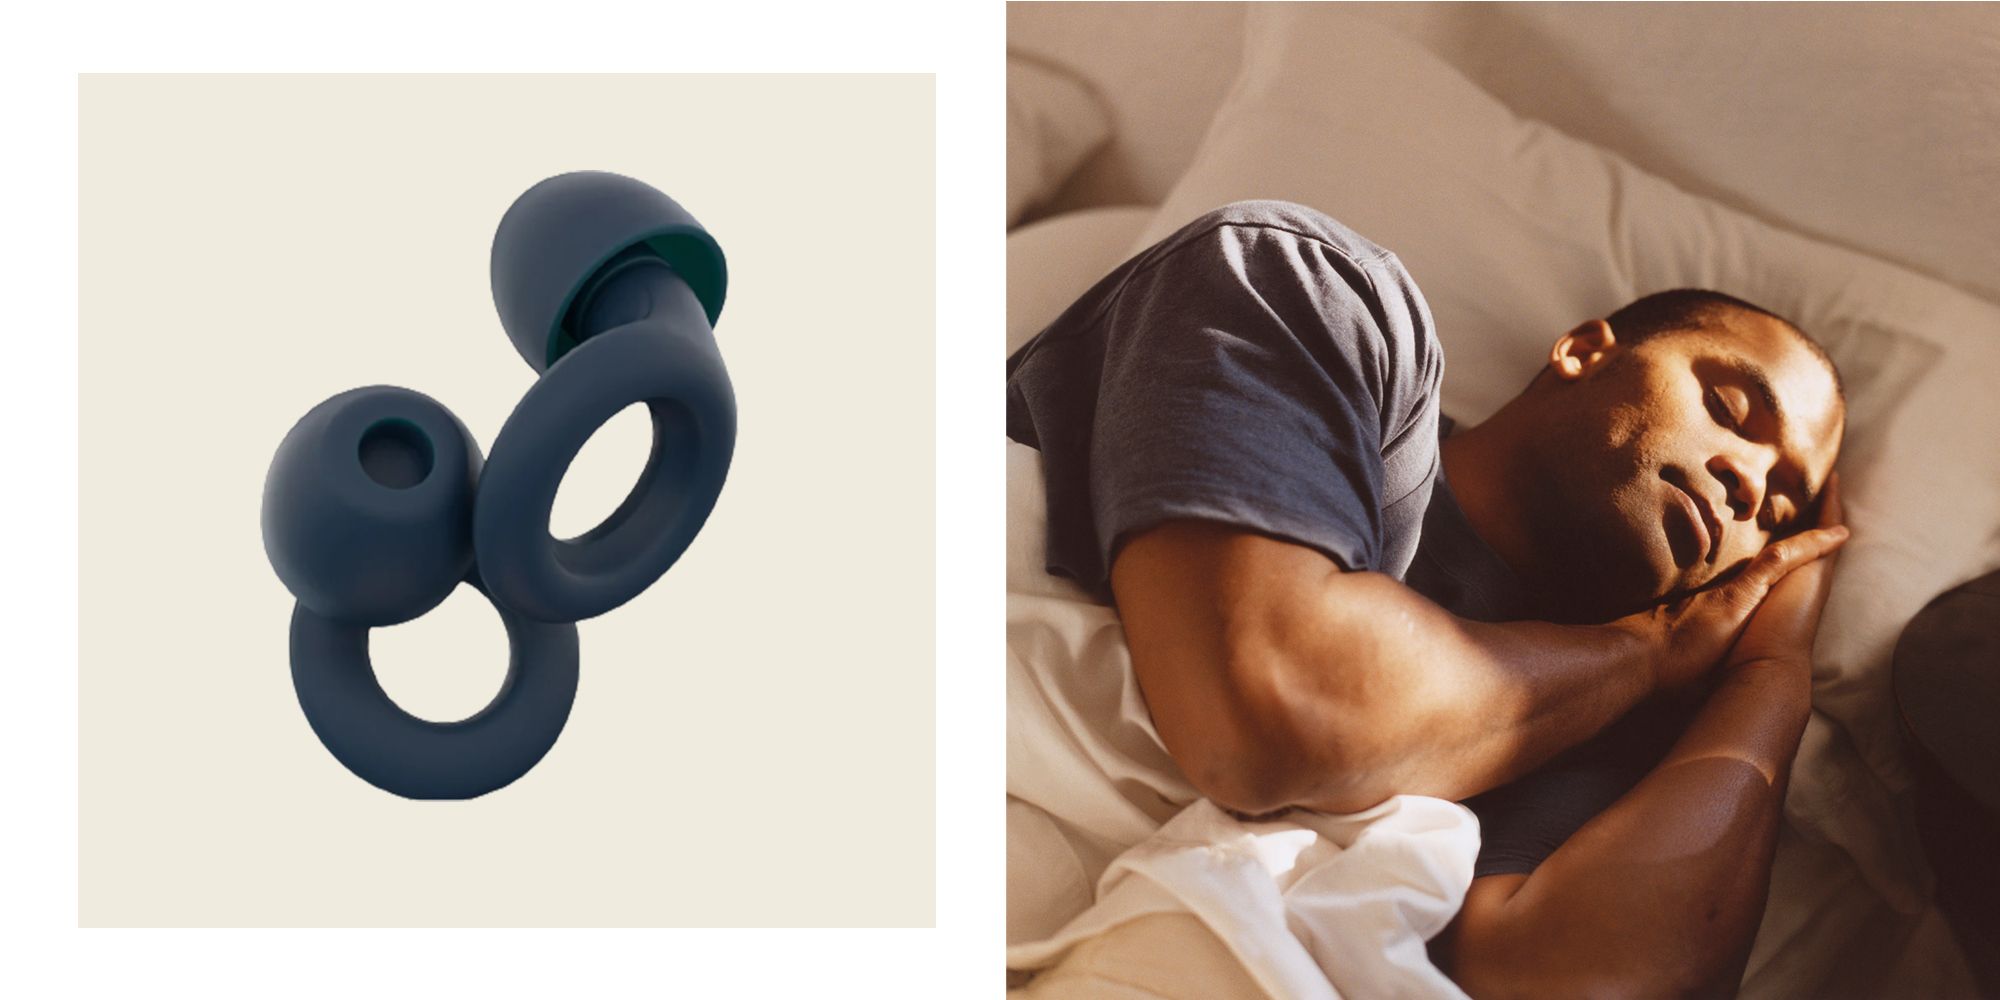 The Best Sleep Mask for Blocking Light AND Sound - Ear Muffs Included –  Hibermate